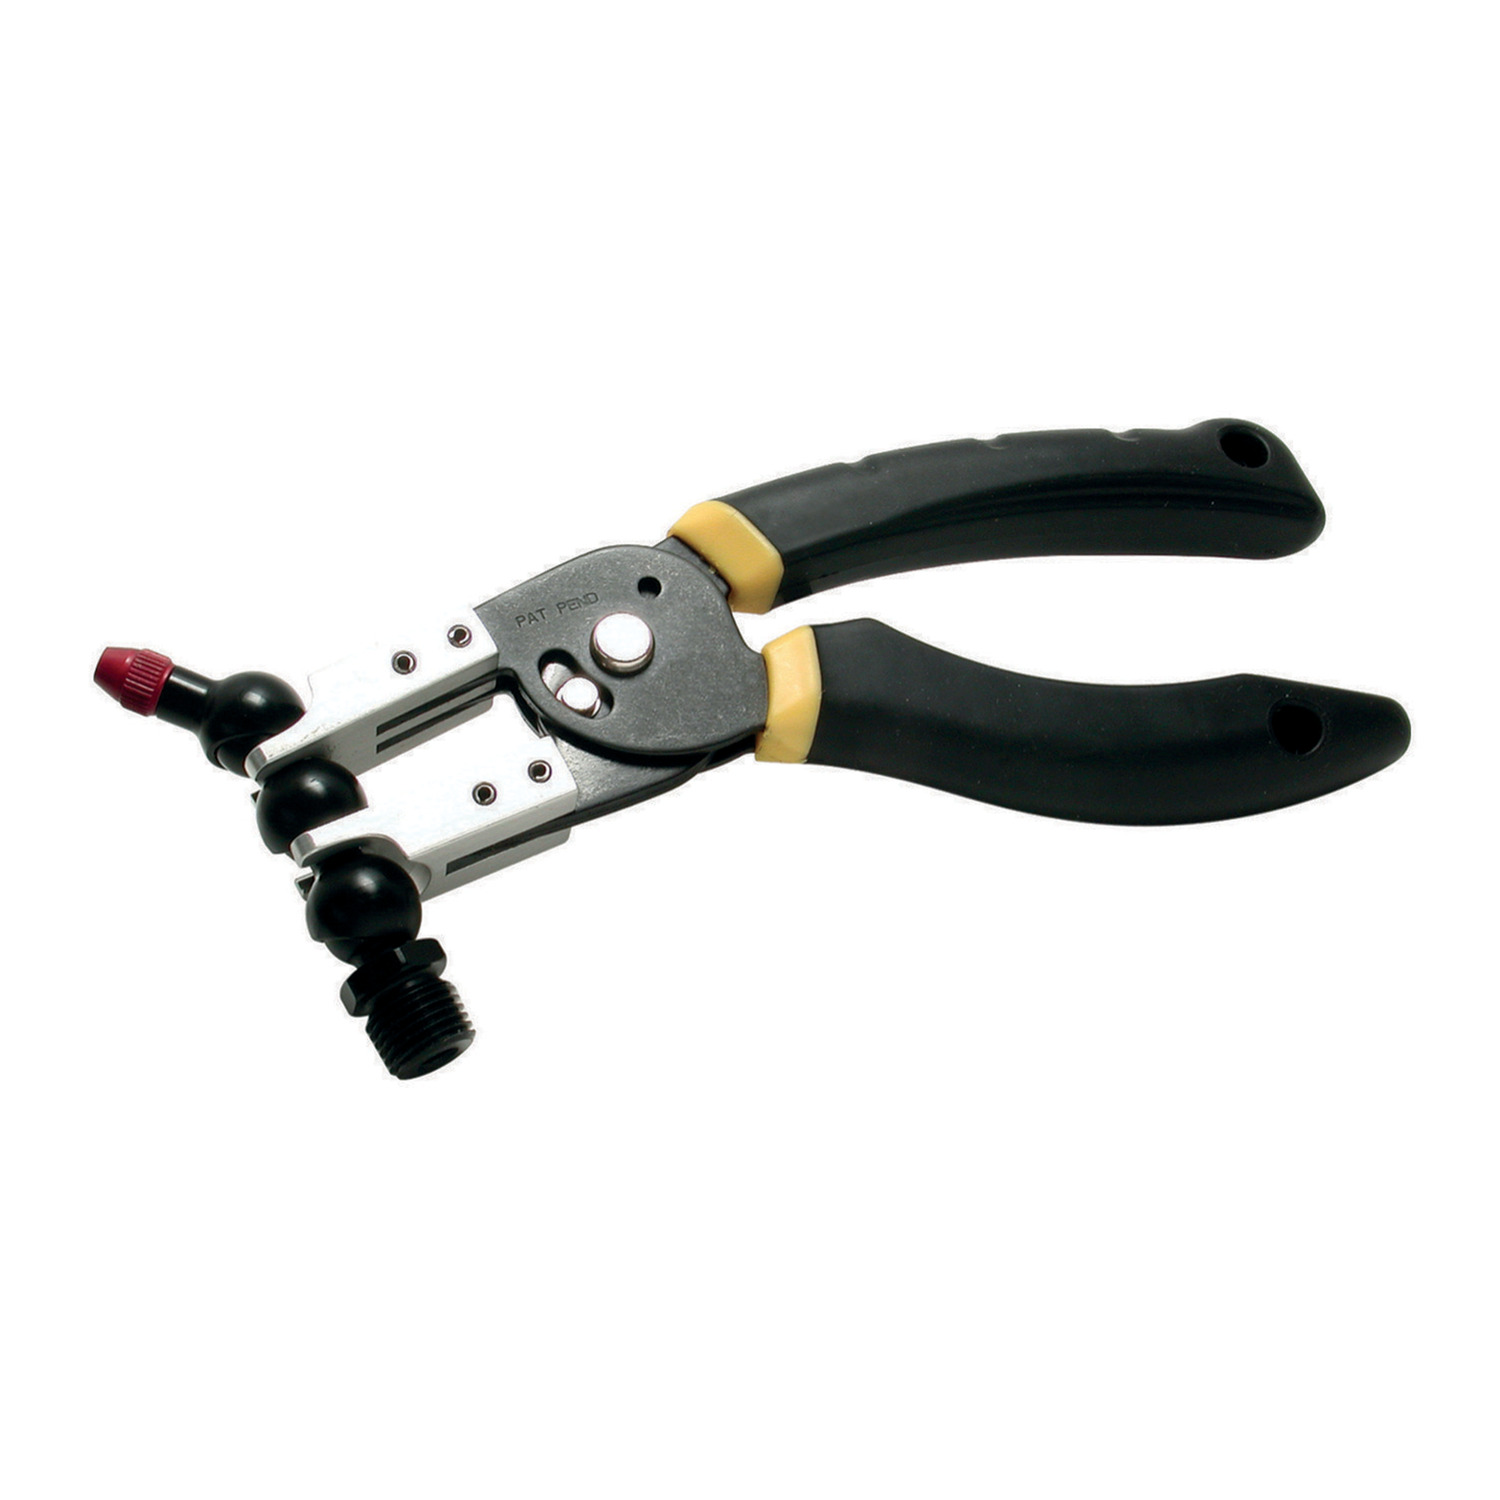 Product 20059, Swivel Max. - Assembly Pliers for modular coolant nozzle system- 20051 to 20056 / 